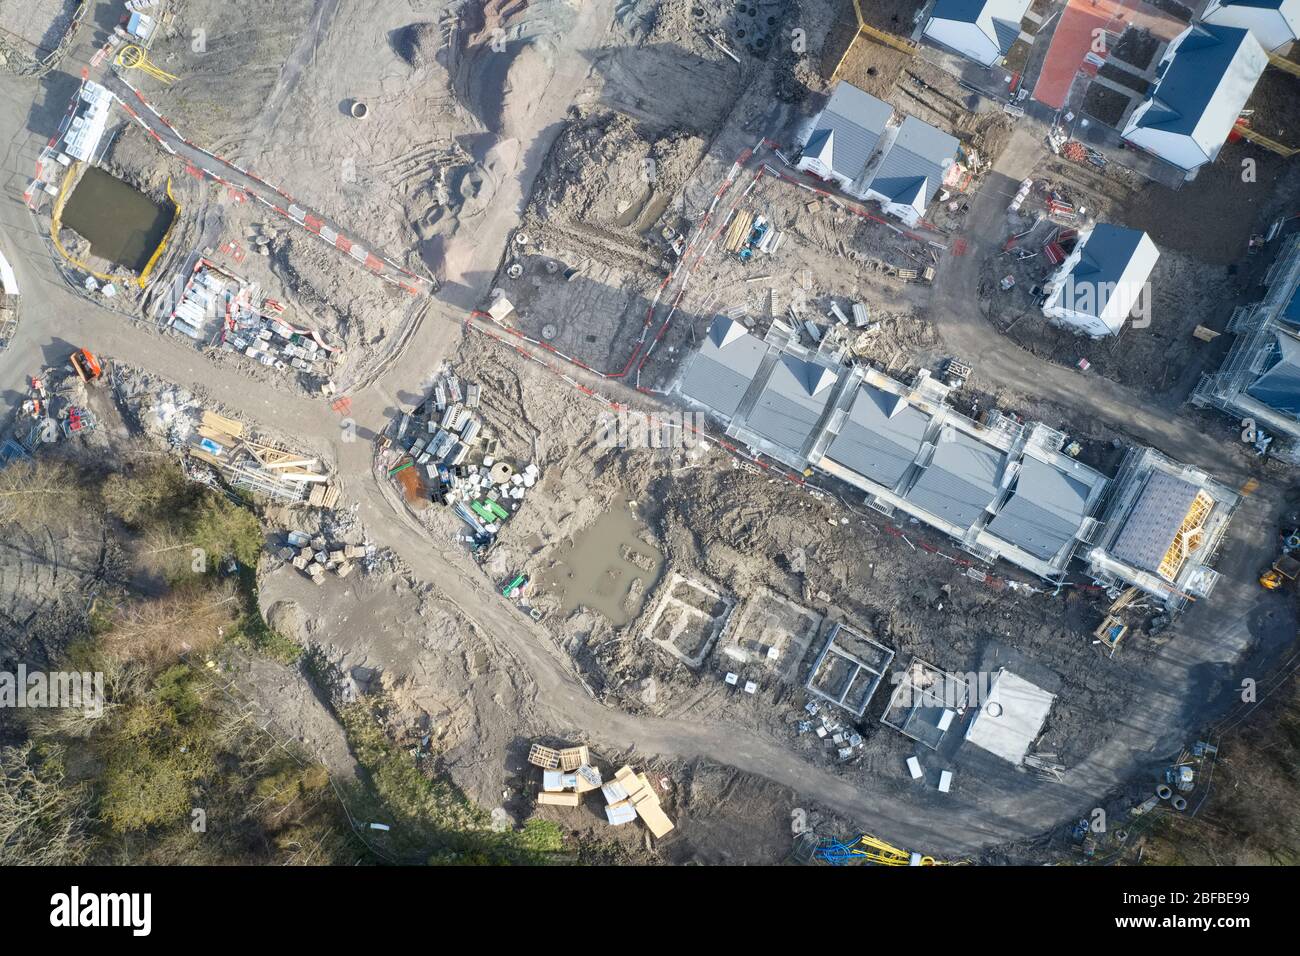 Construction building site aerial view materials pipes machinery equipment Stock Photo